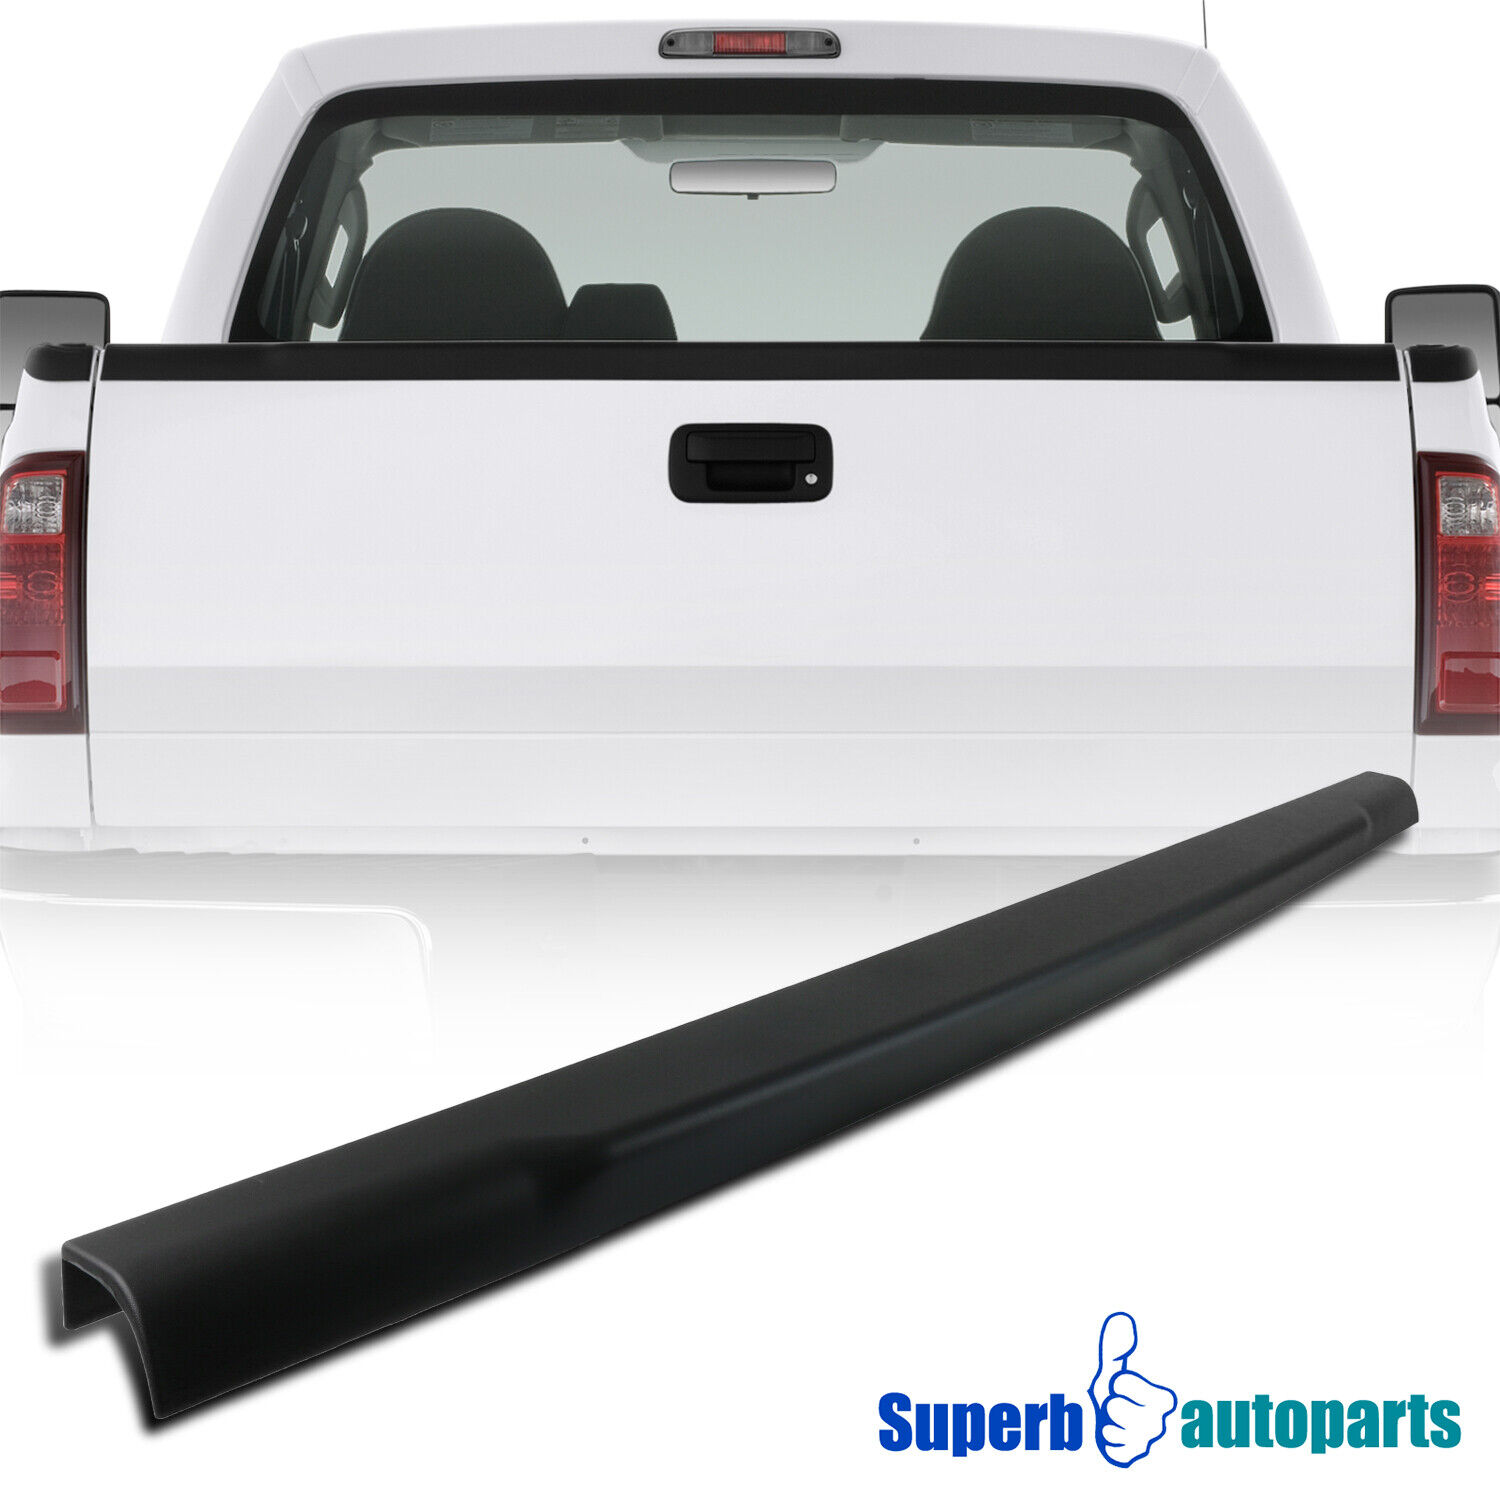 For 2008-2016 Ford 08-16 F250 350 450 Black Tailgate Cap Molding Protector